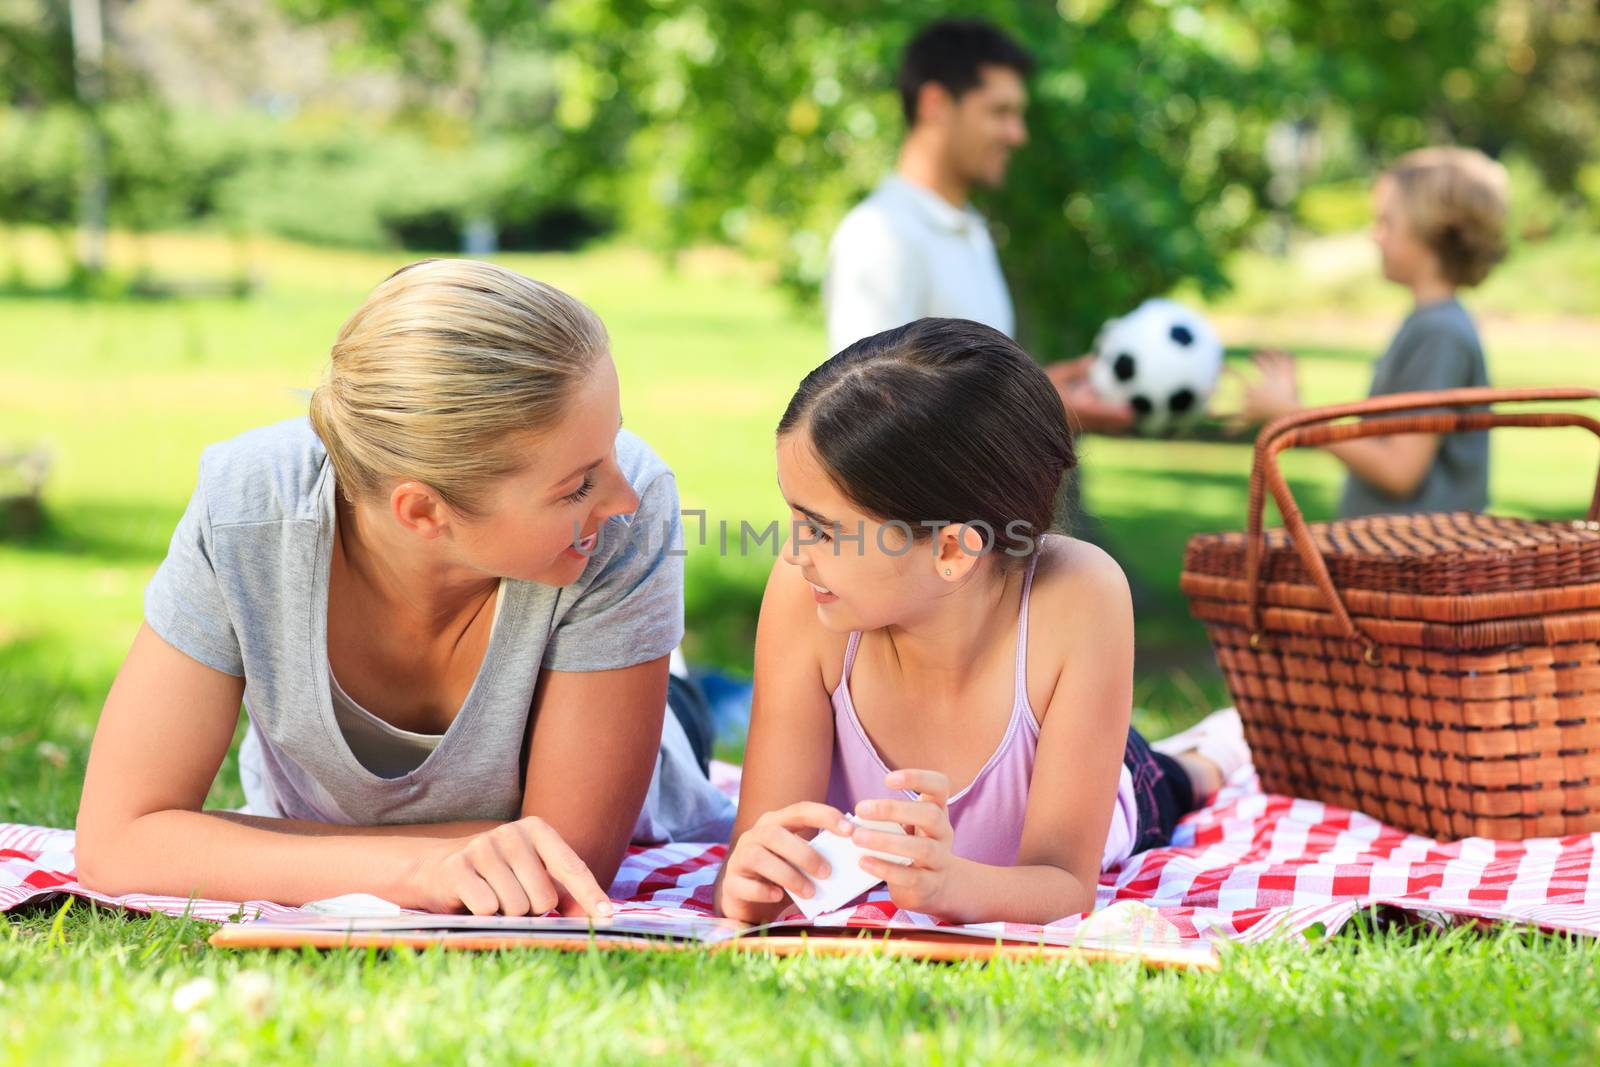 Family picnicking in the park by Wavebreakmedia